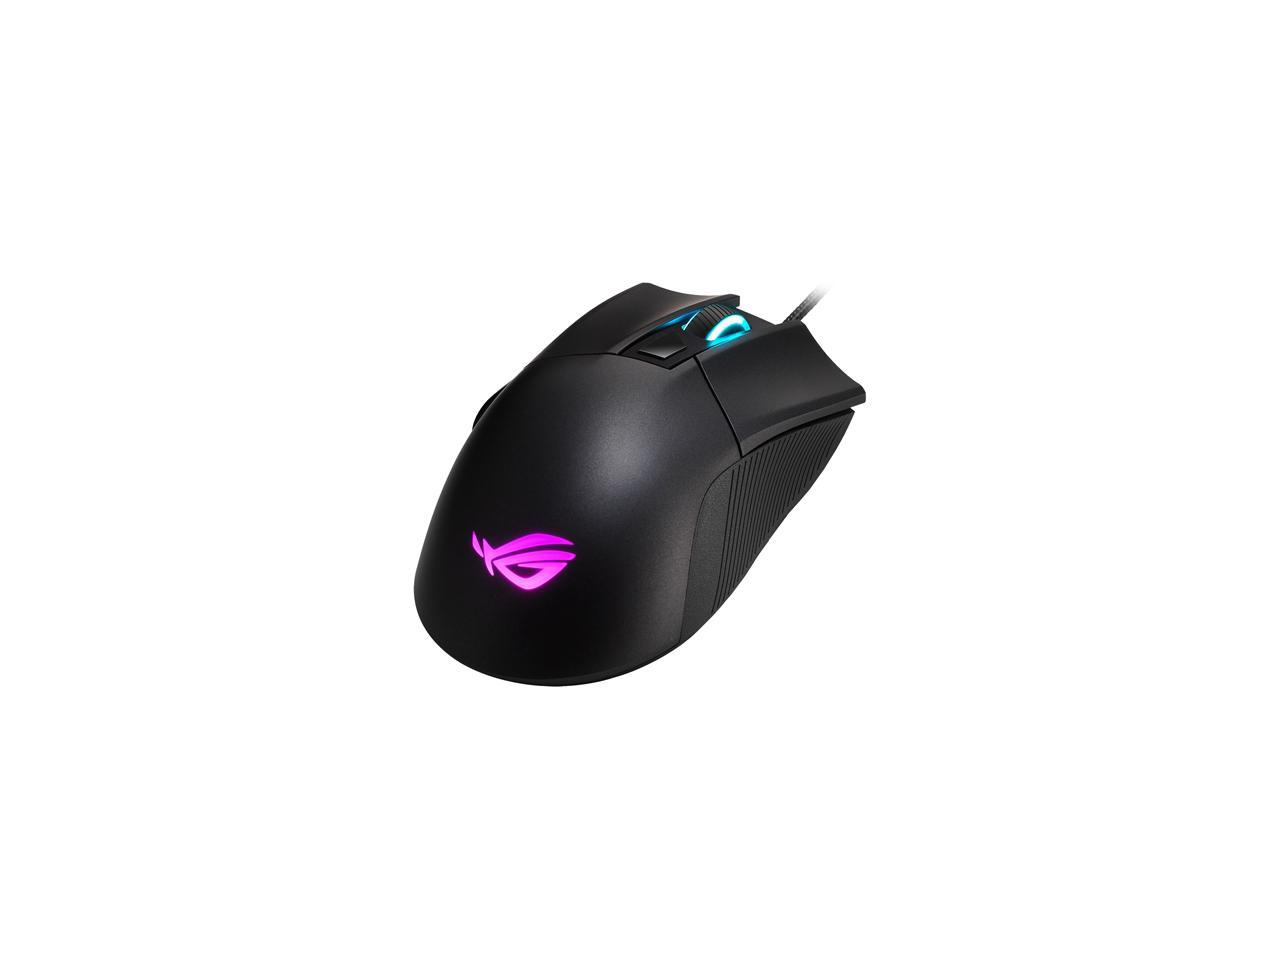 ASUS Optical Gaming Mouse - ROG Gladius II Core | Ergonomic Right-hand Grip | Lightweight PC Gaming Mouse | 6200 DPI Optical Sensor | Omron Switches | 6 Buttons | Aura Sync RGB Lighting - image 4 of 4